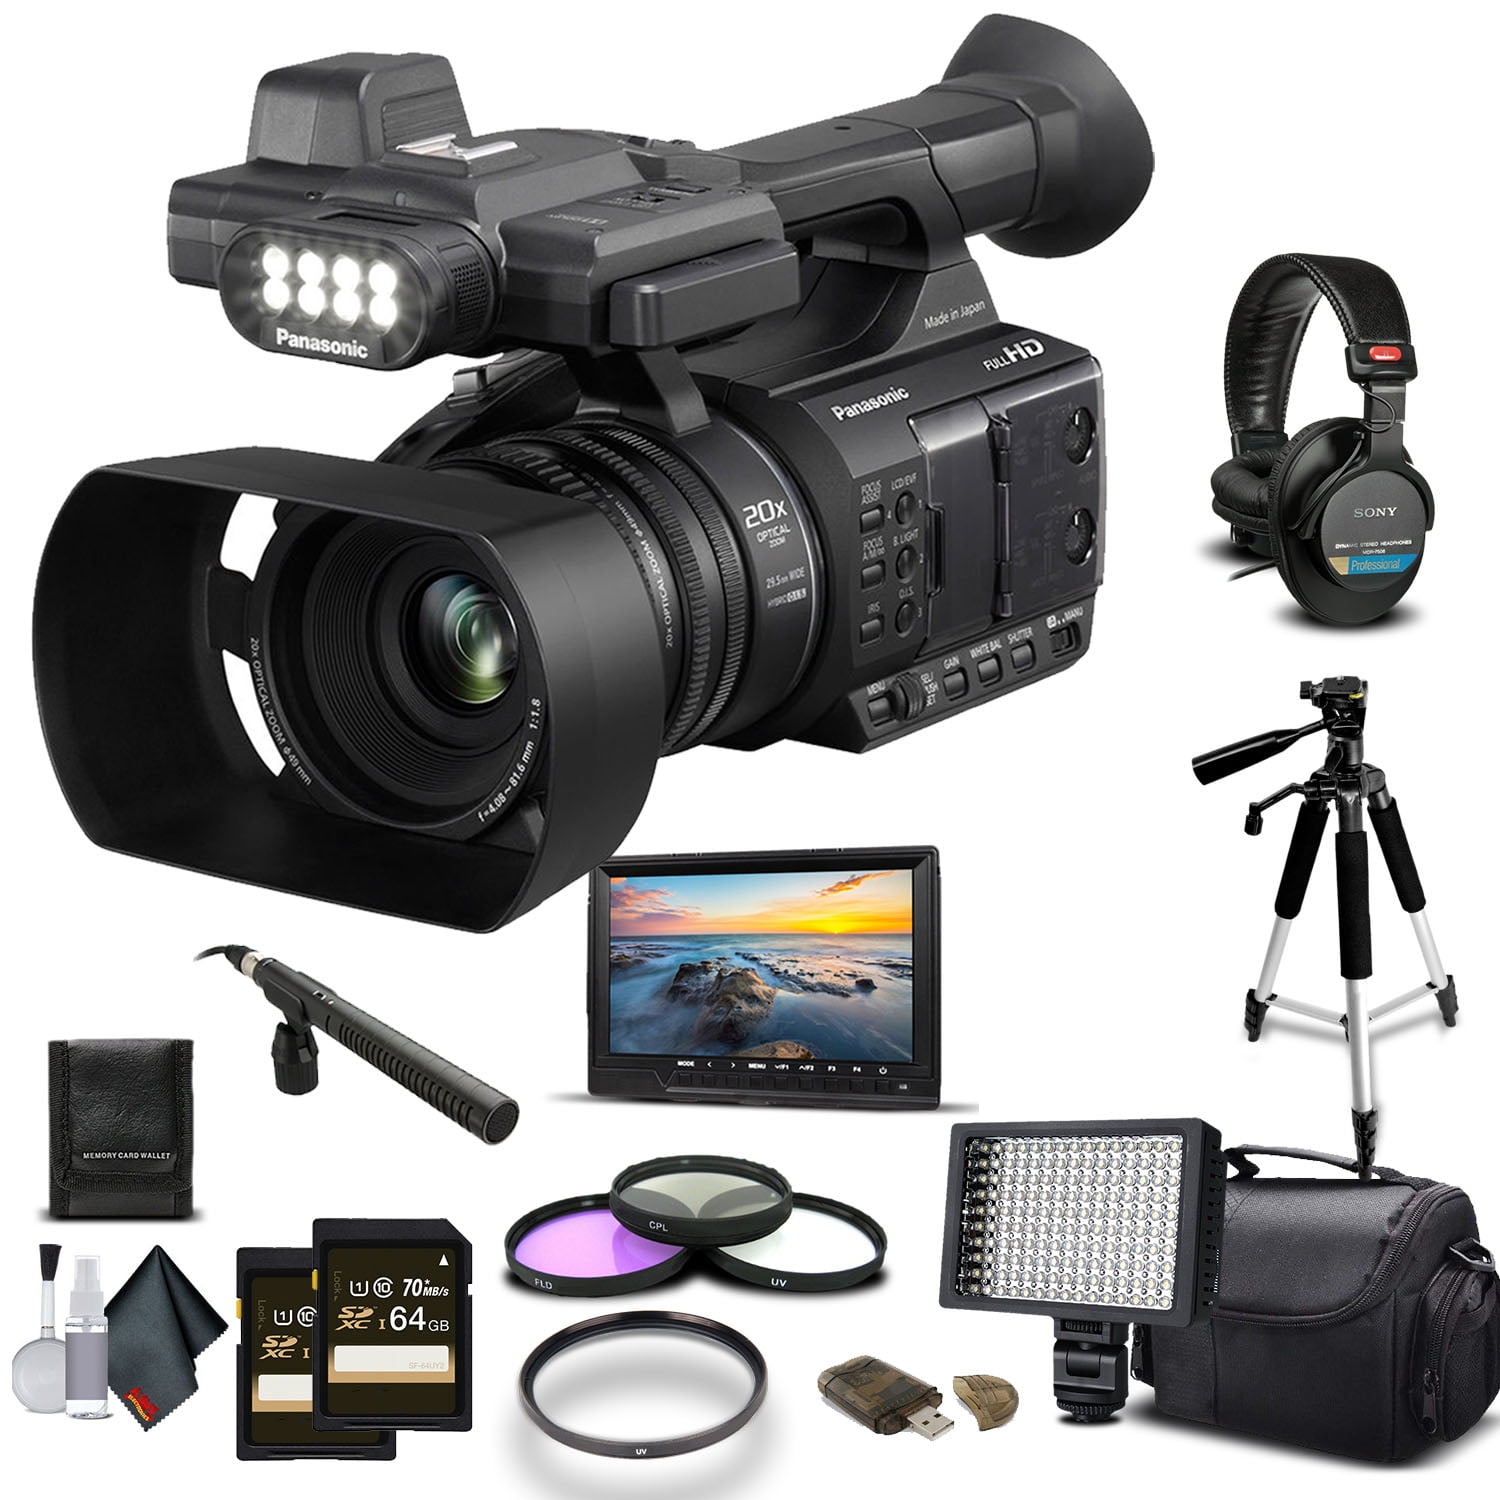 Panasonic AG-AC30 Full HD Camcorder (AG-AC30PJ) With -64GB Memory Card,  UV Filter, LED Light, Case, Tripod, Rode Mic, External Screen, and Sony  MDR-7506 Headphones Professional Bundle